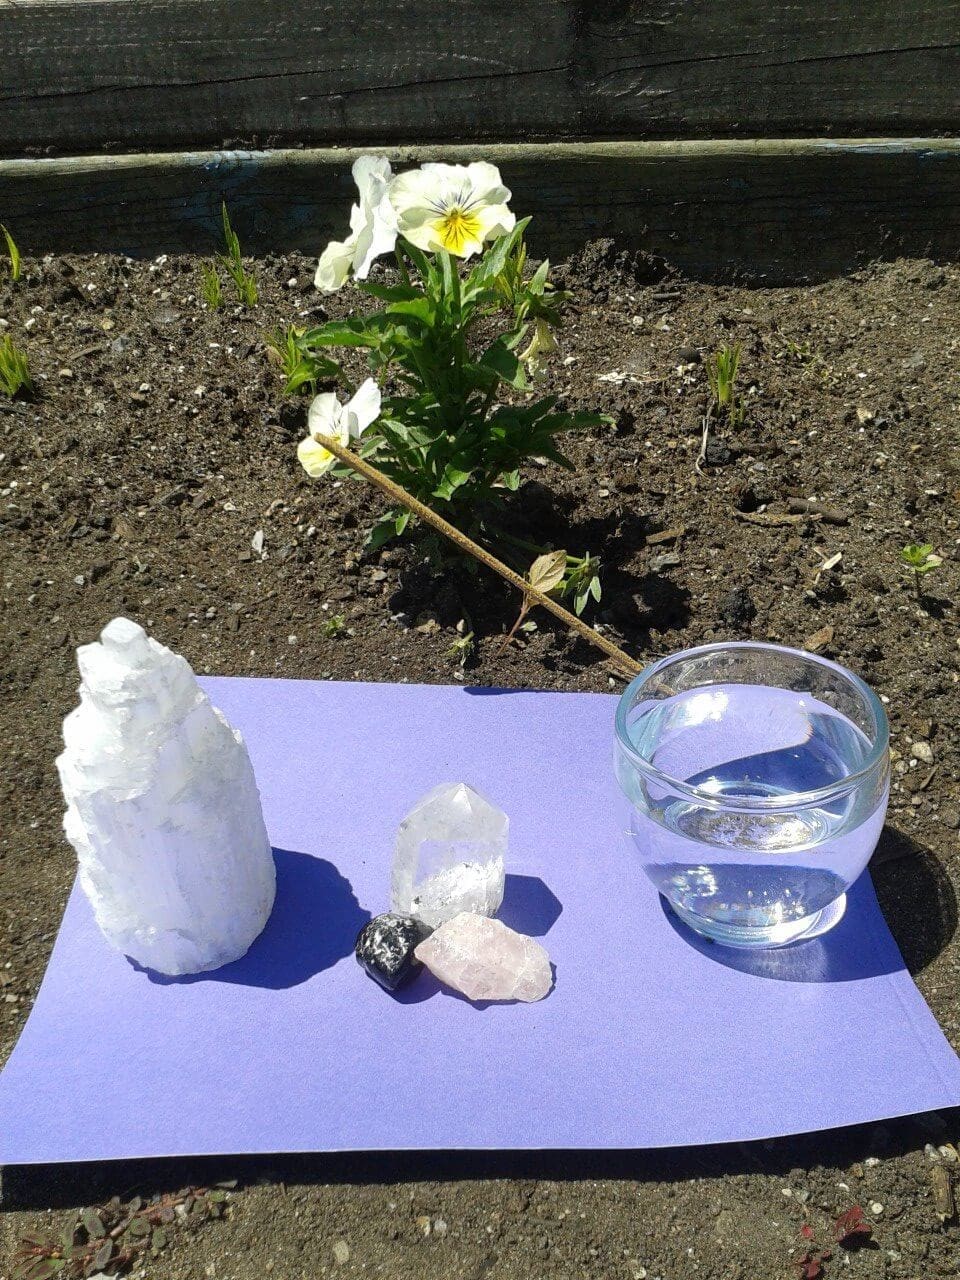 Why and how to clean and purify stones?